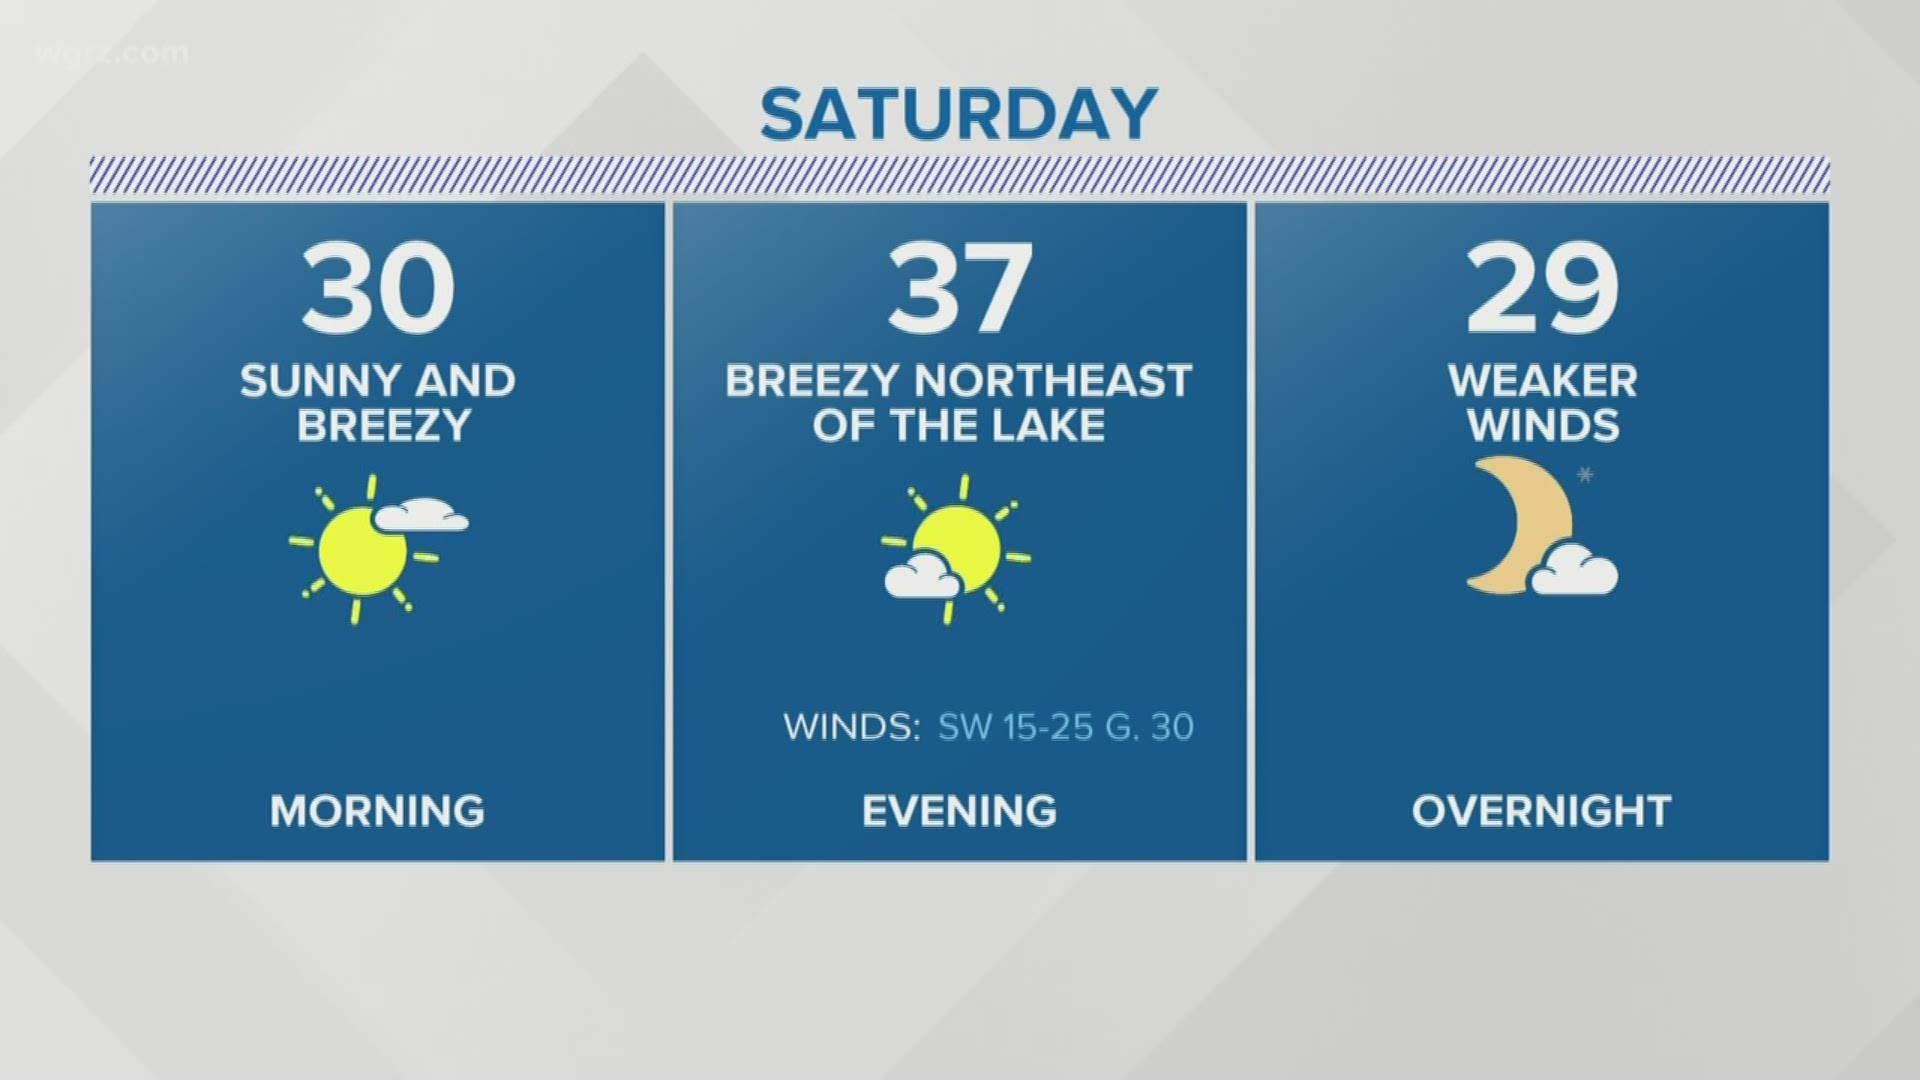 Temperatures on Saturday will reach the mid 30's, then stay in the mid to upper 20's Saturday night. The winds at night keep the temperature from dropping too much.